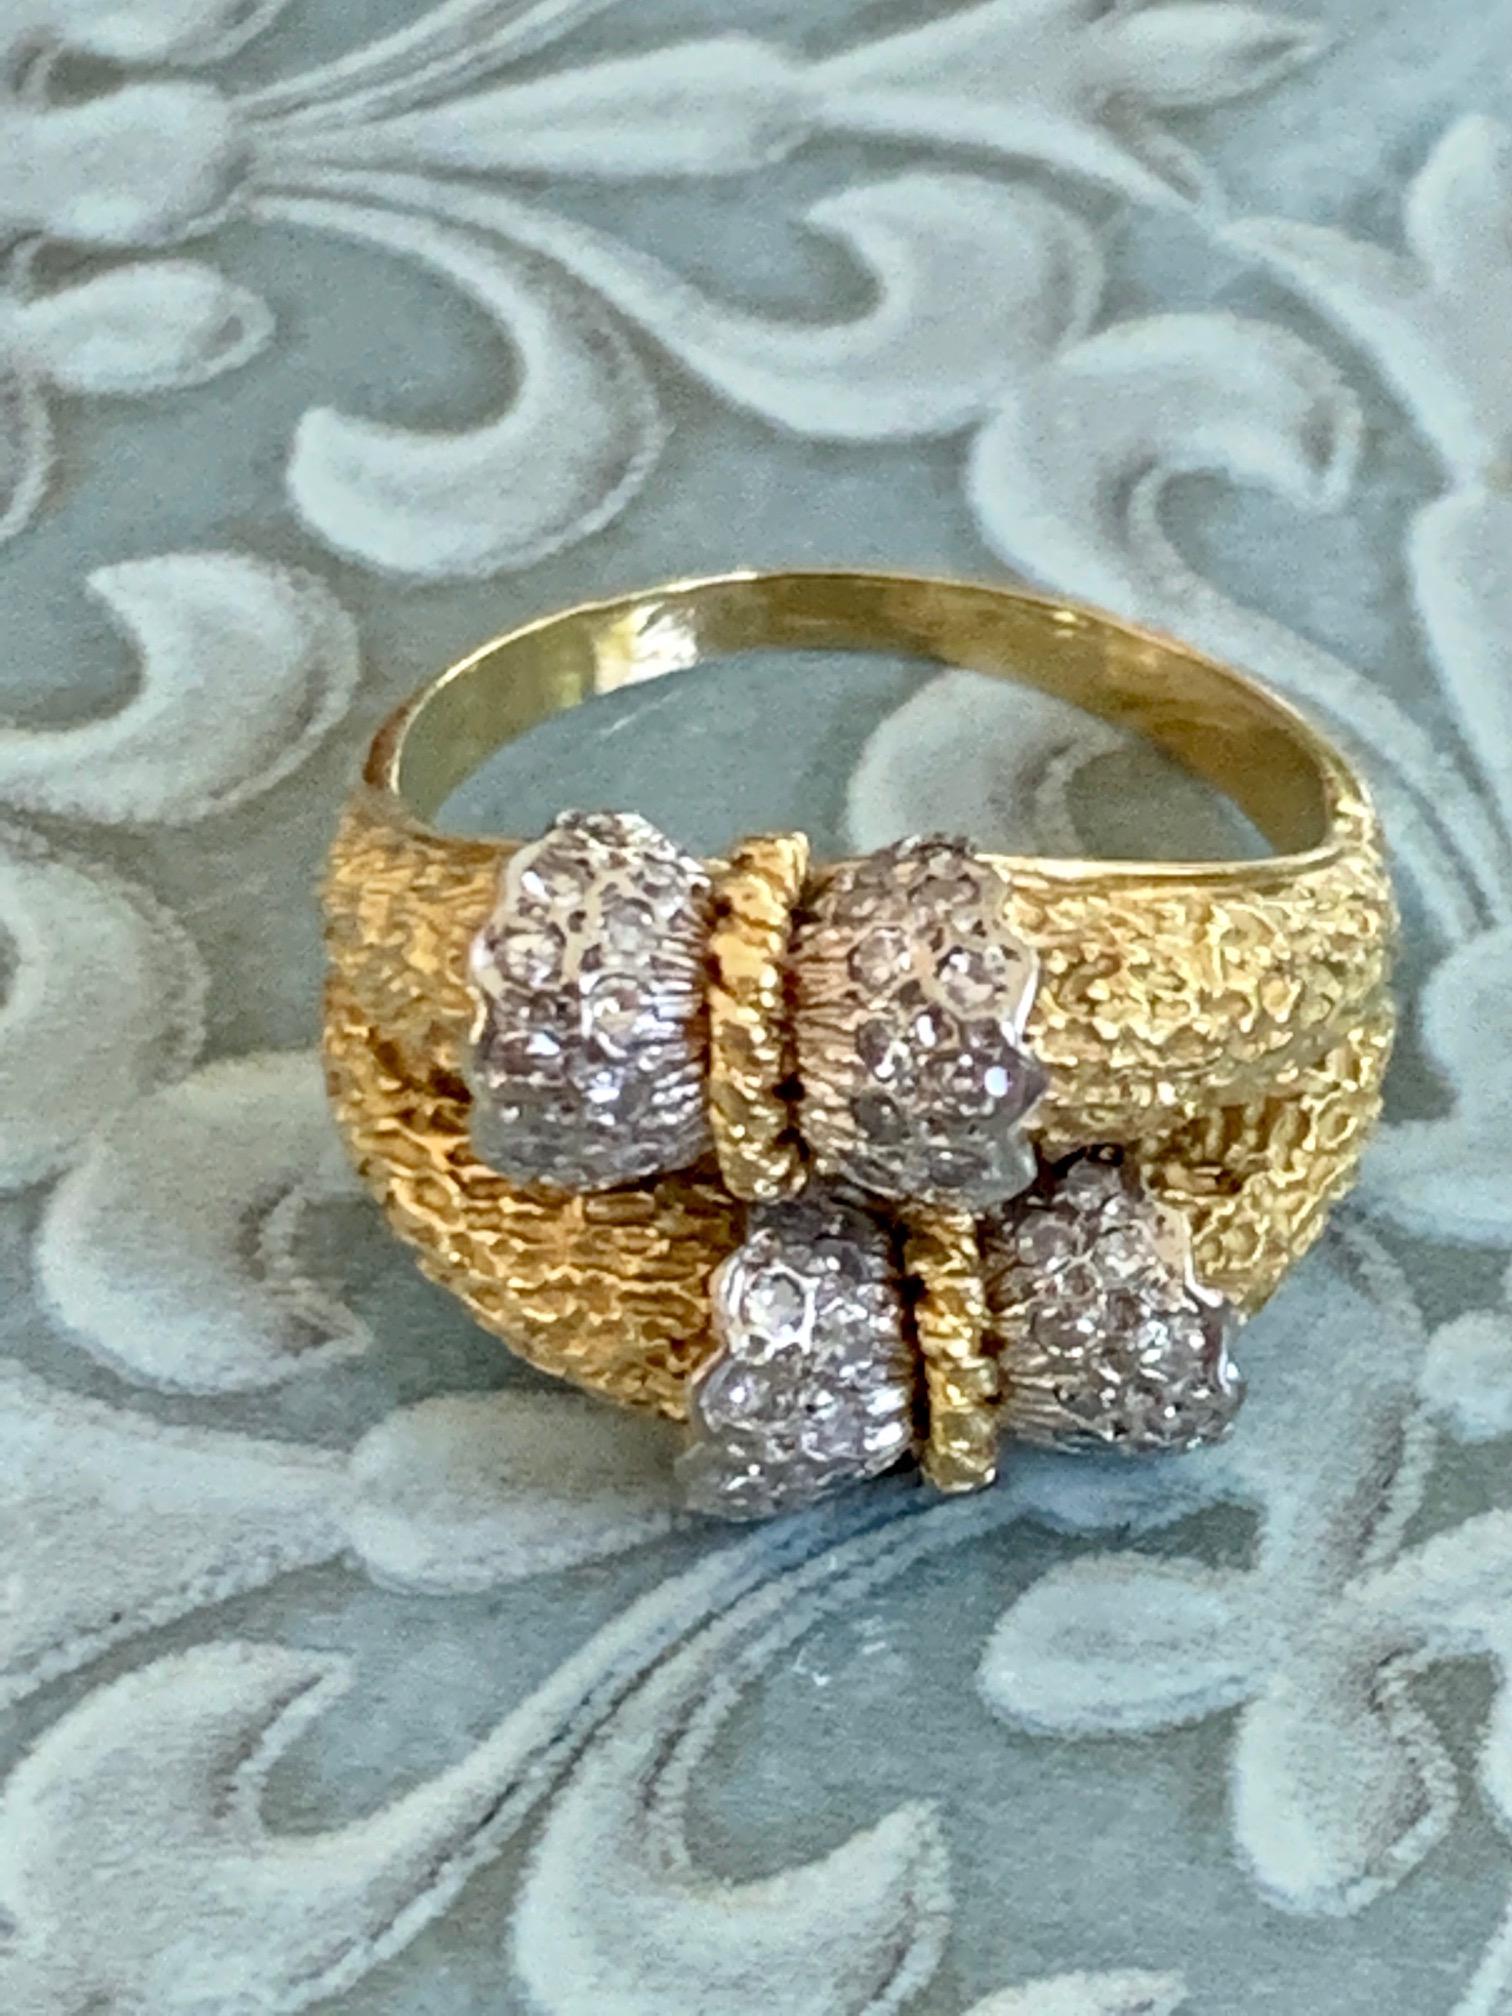 This fabulous modern 18 karat white and yellow Gold Diamond ring looks like it is wrapped around your finger when worn!  
It comes to you from the 1960's-1970's era.
There is no stamp or maker's mark.
The ring features:
48 single cut Diamonds!! 